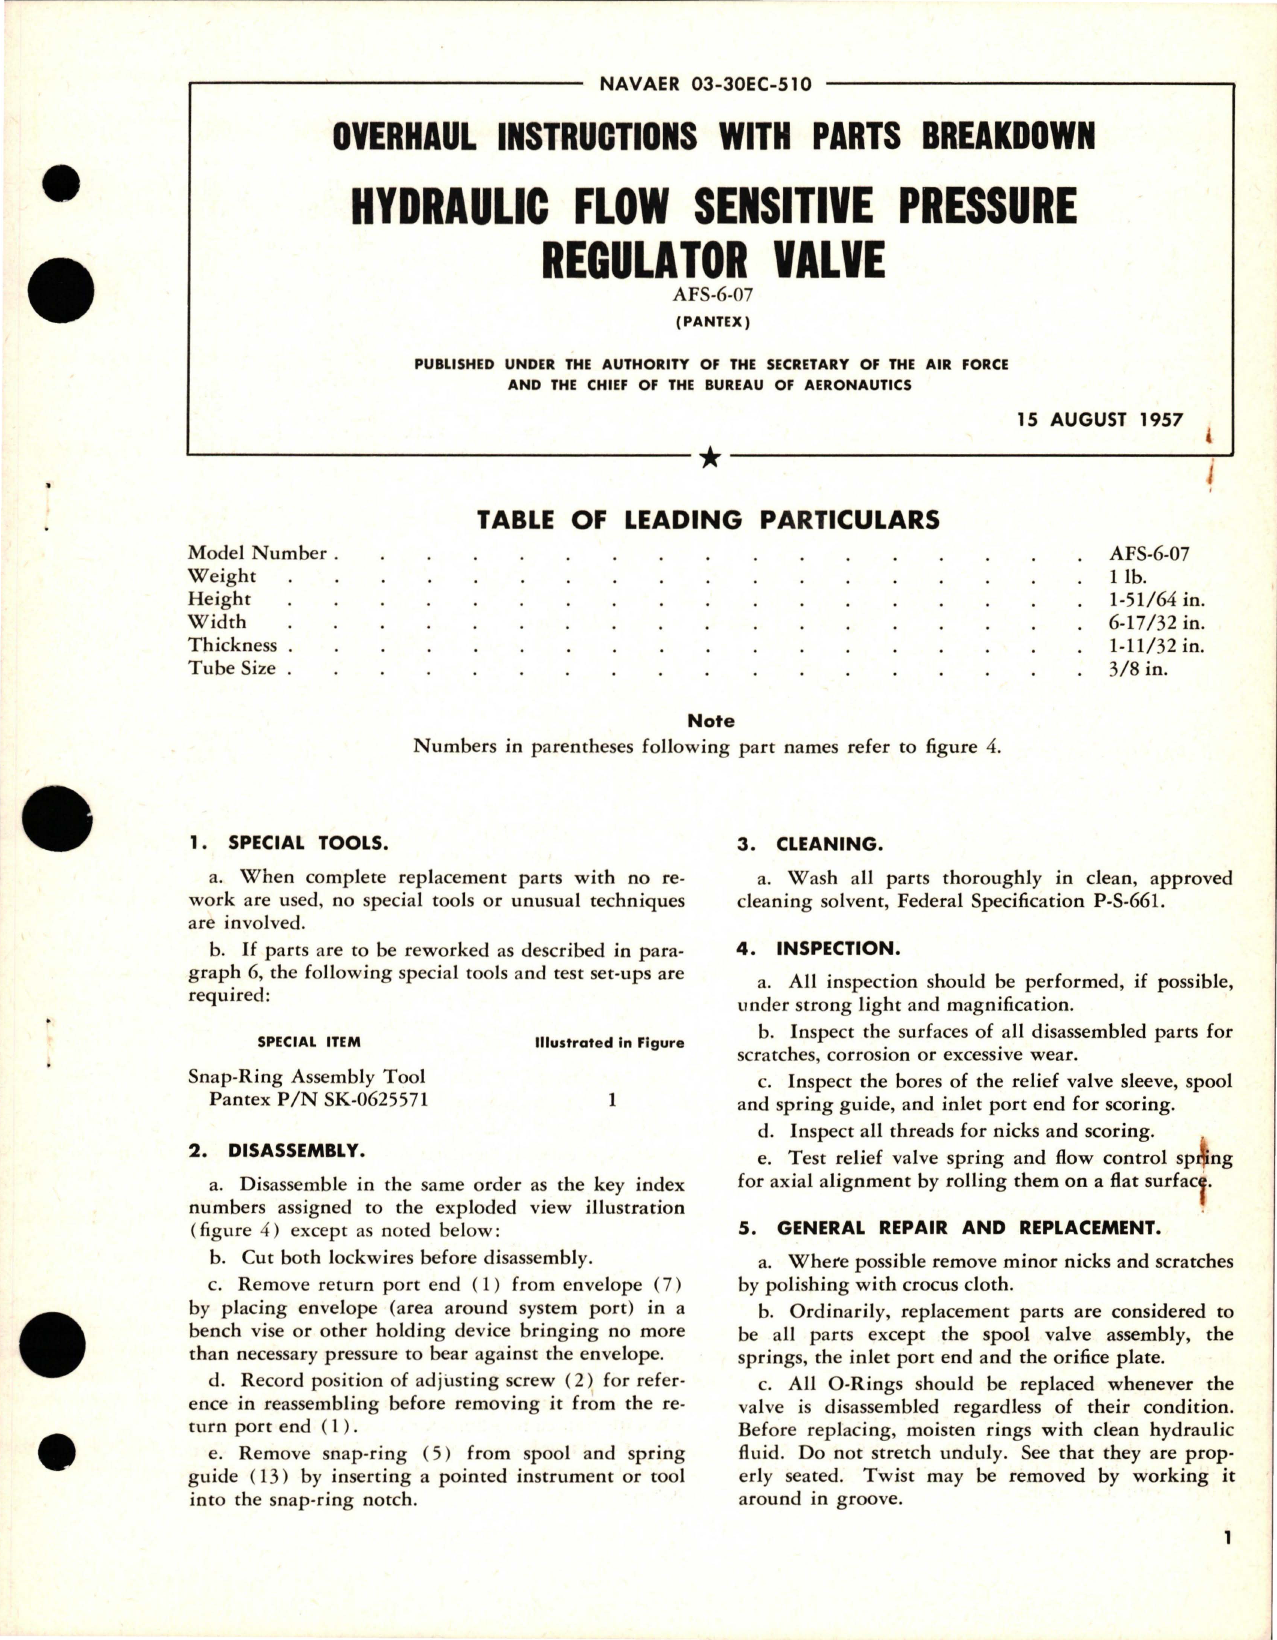 Sample page 1 from AirCorps Library document: Overhaul Instructions with Parts Breakdown for Hydraulic Flow Sensitive Pressure Regulator Valve - AFS-6-07